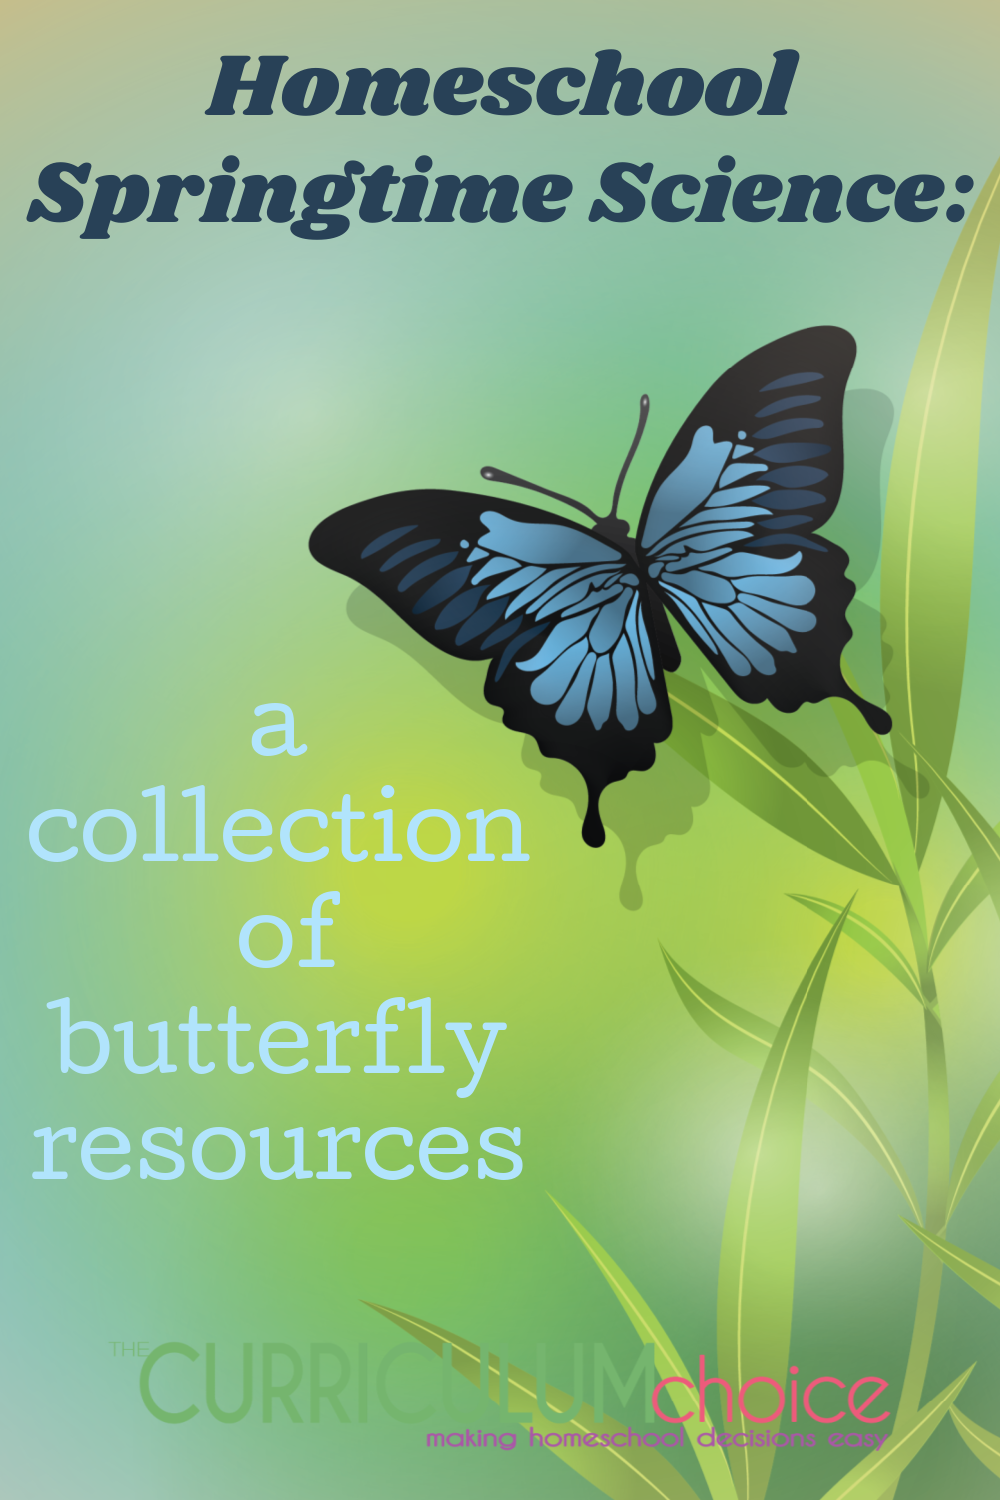 Homeschool Springtime Science: a collection of butterfly resources that are sure to delight and educate both you and your children! Books, printables, a butterfly kit, videos and more!